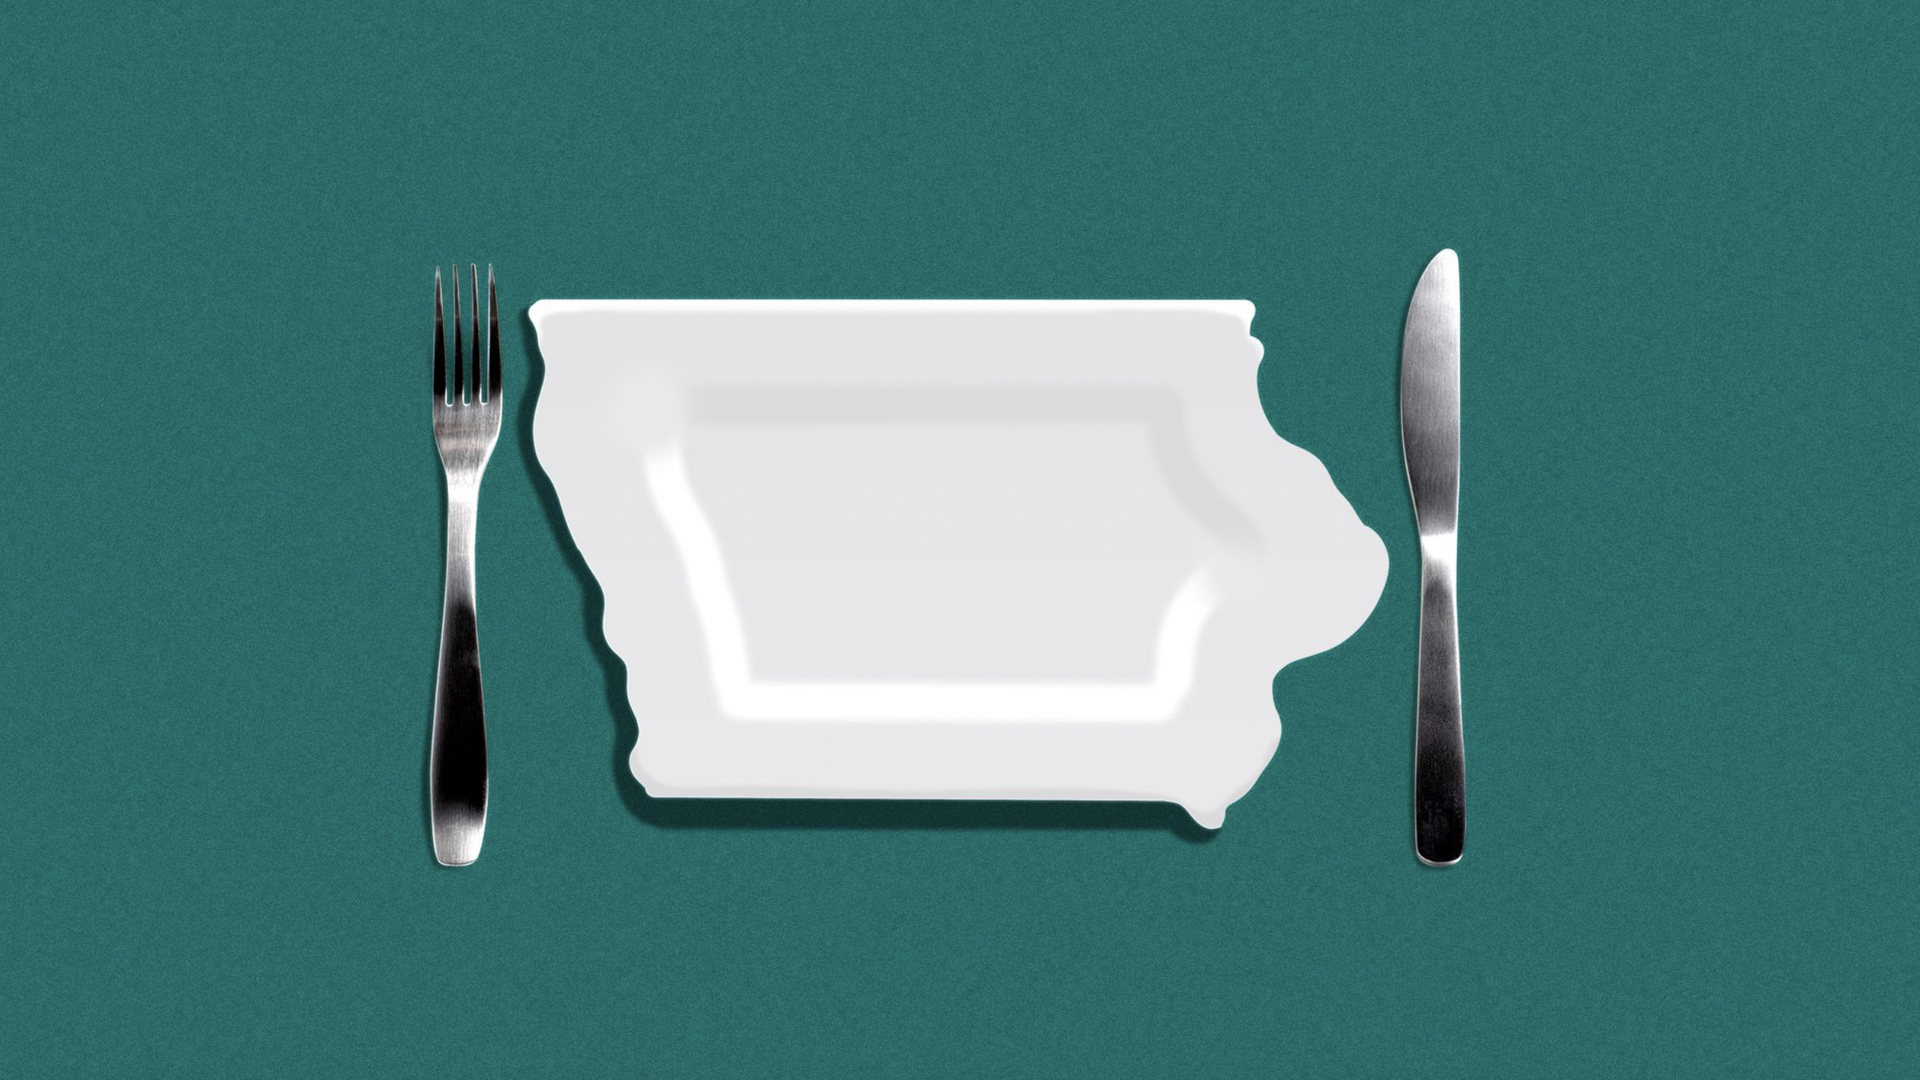 Illustration of fork and knife with a plate the shape of Iowa